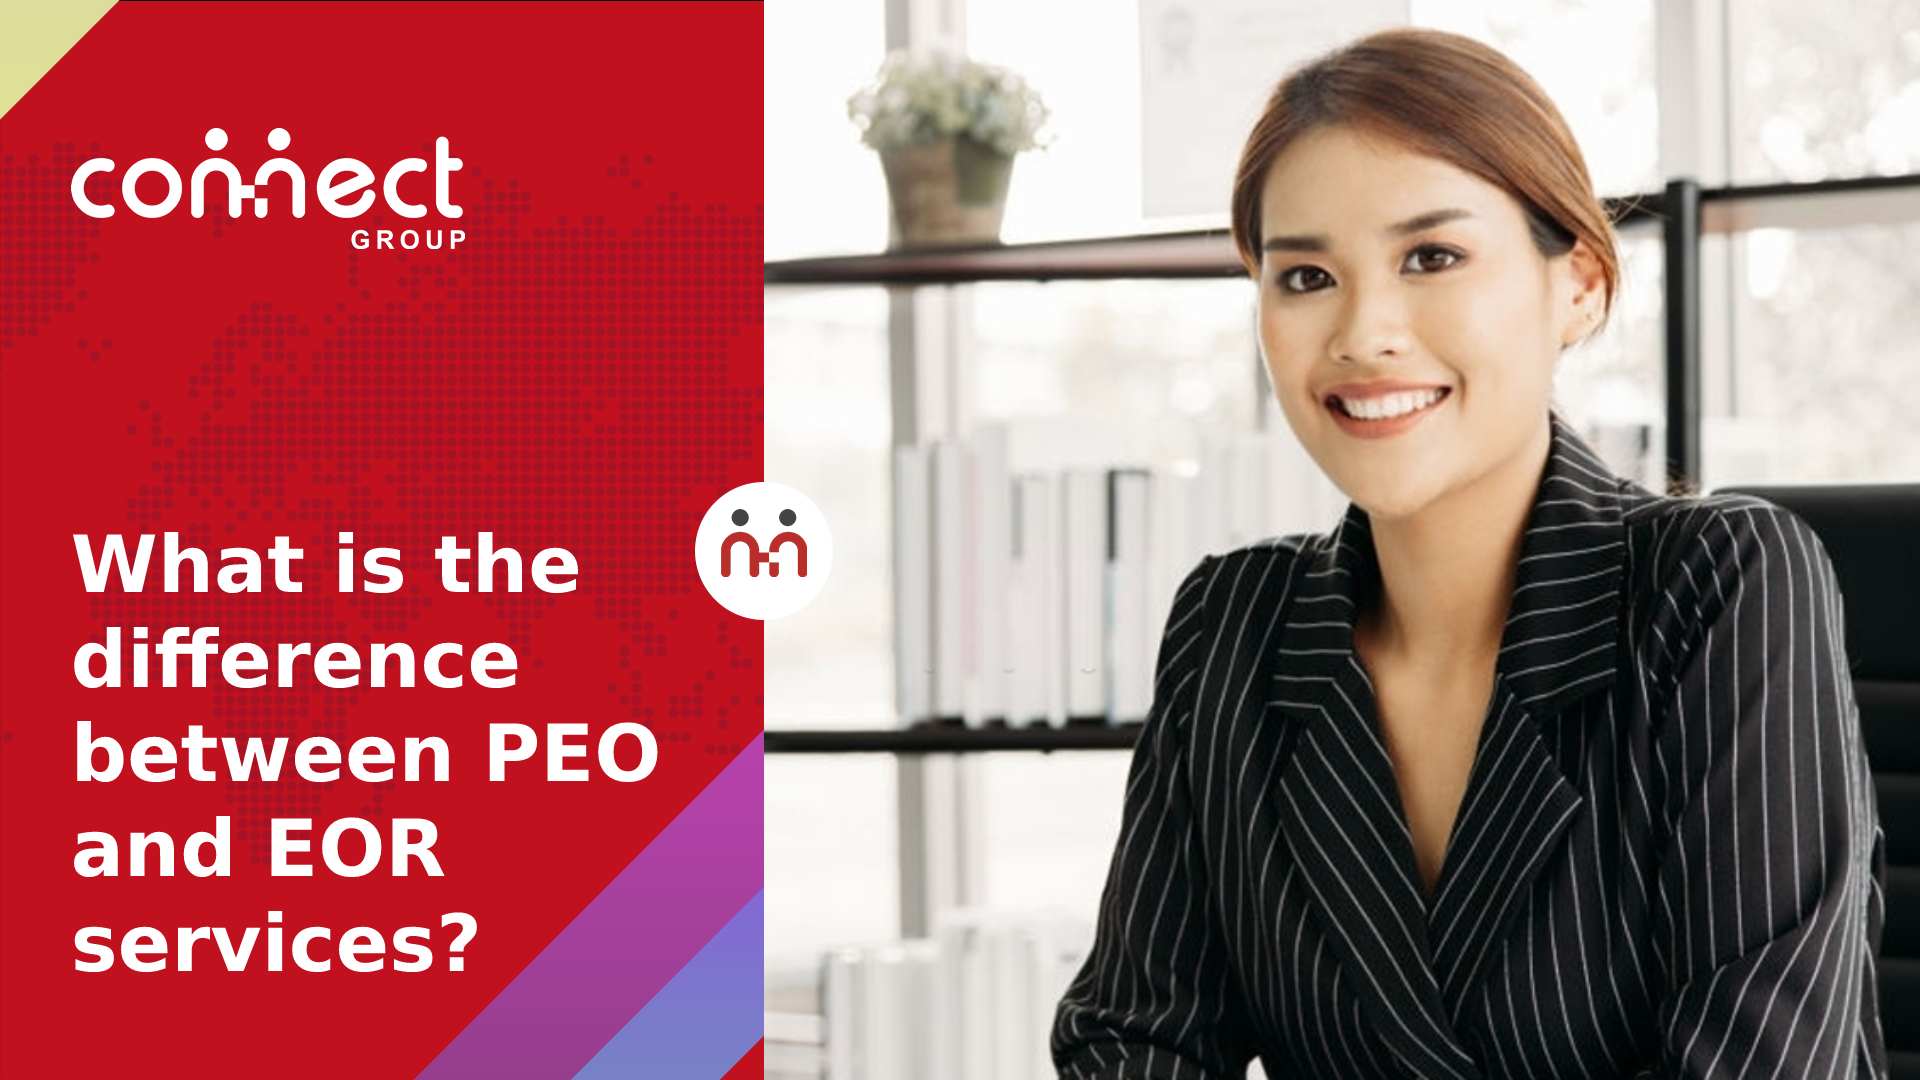 What is the difference between PEO and EOR services?